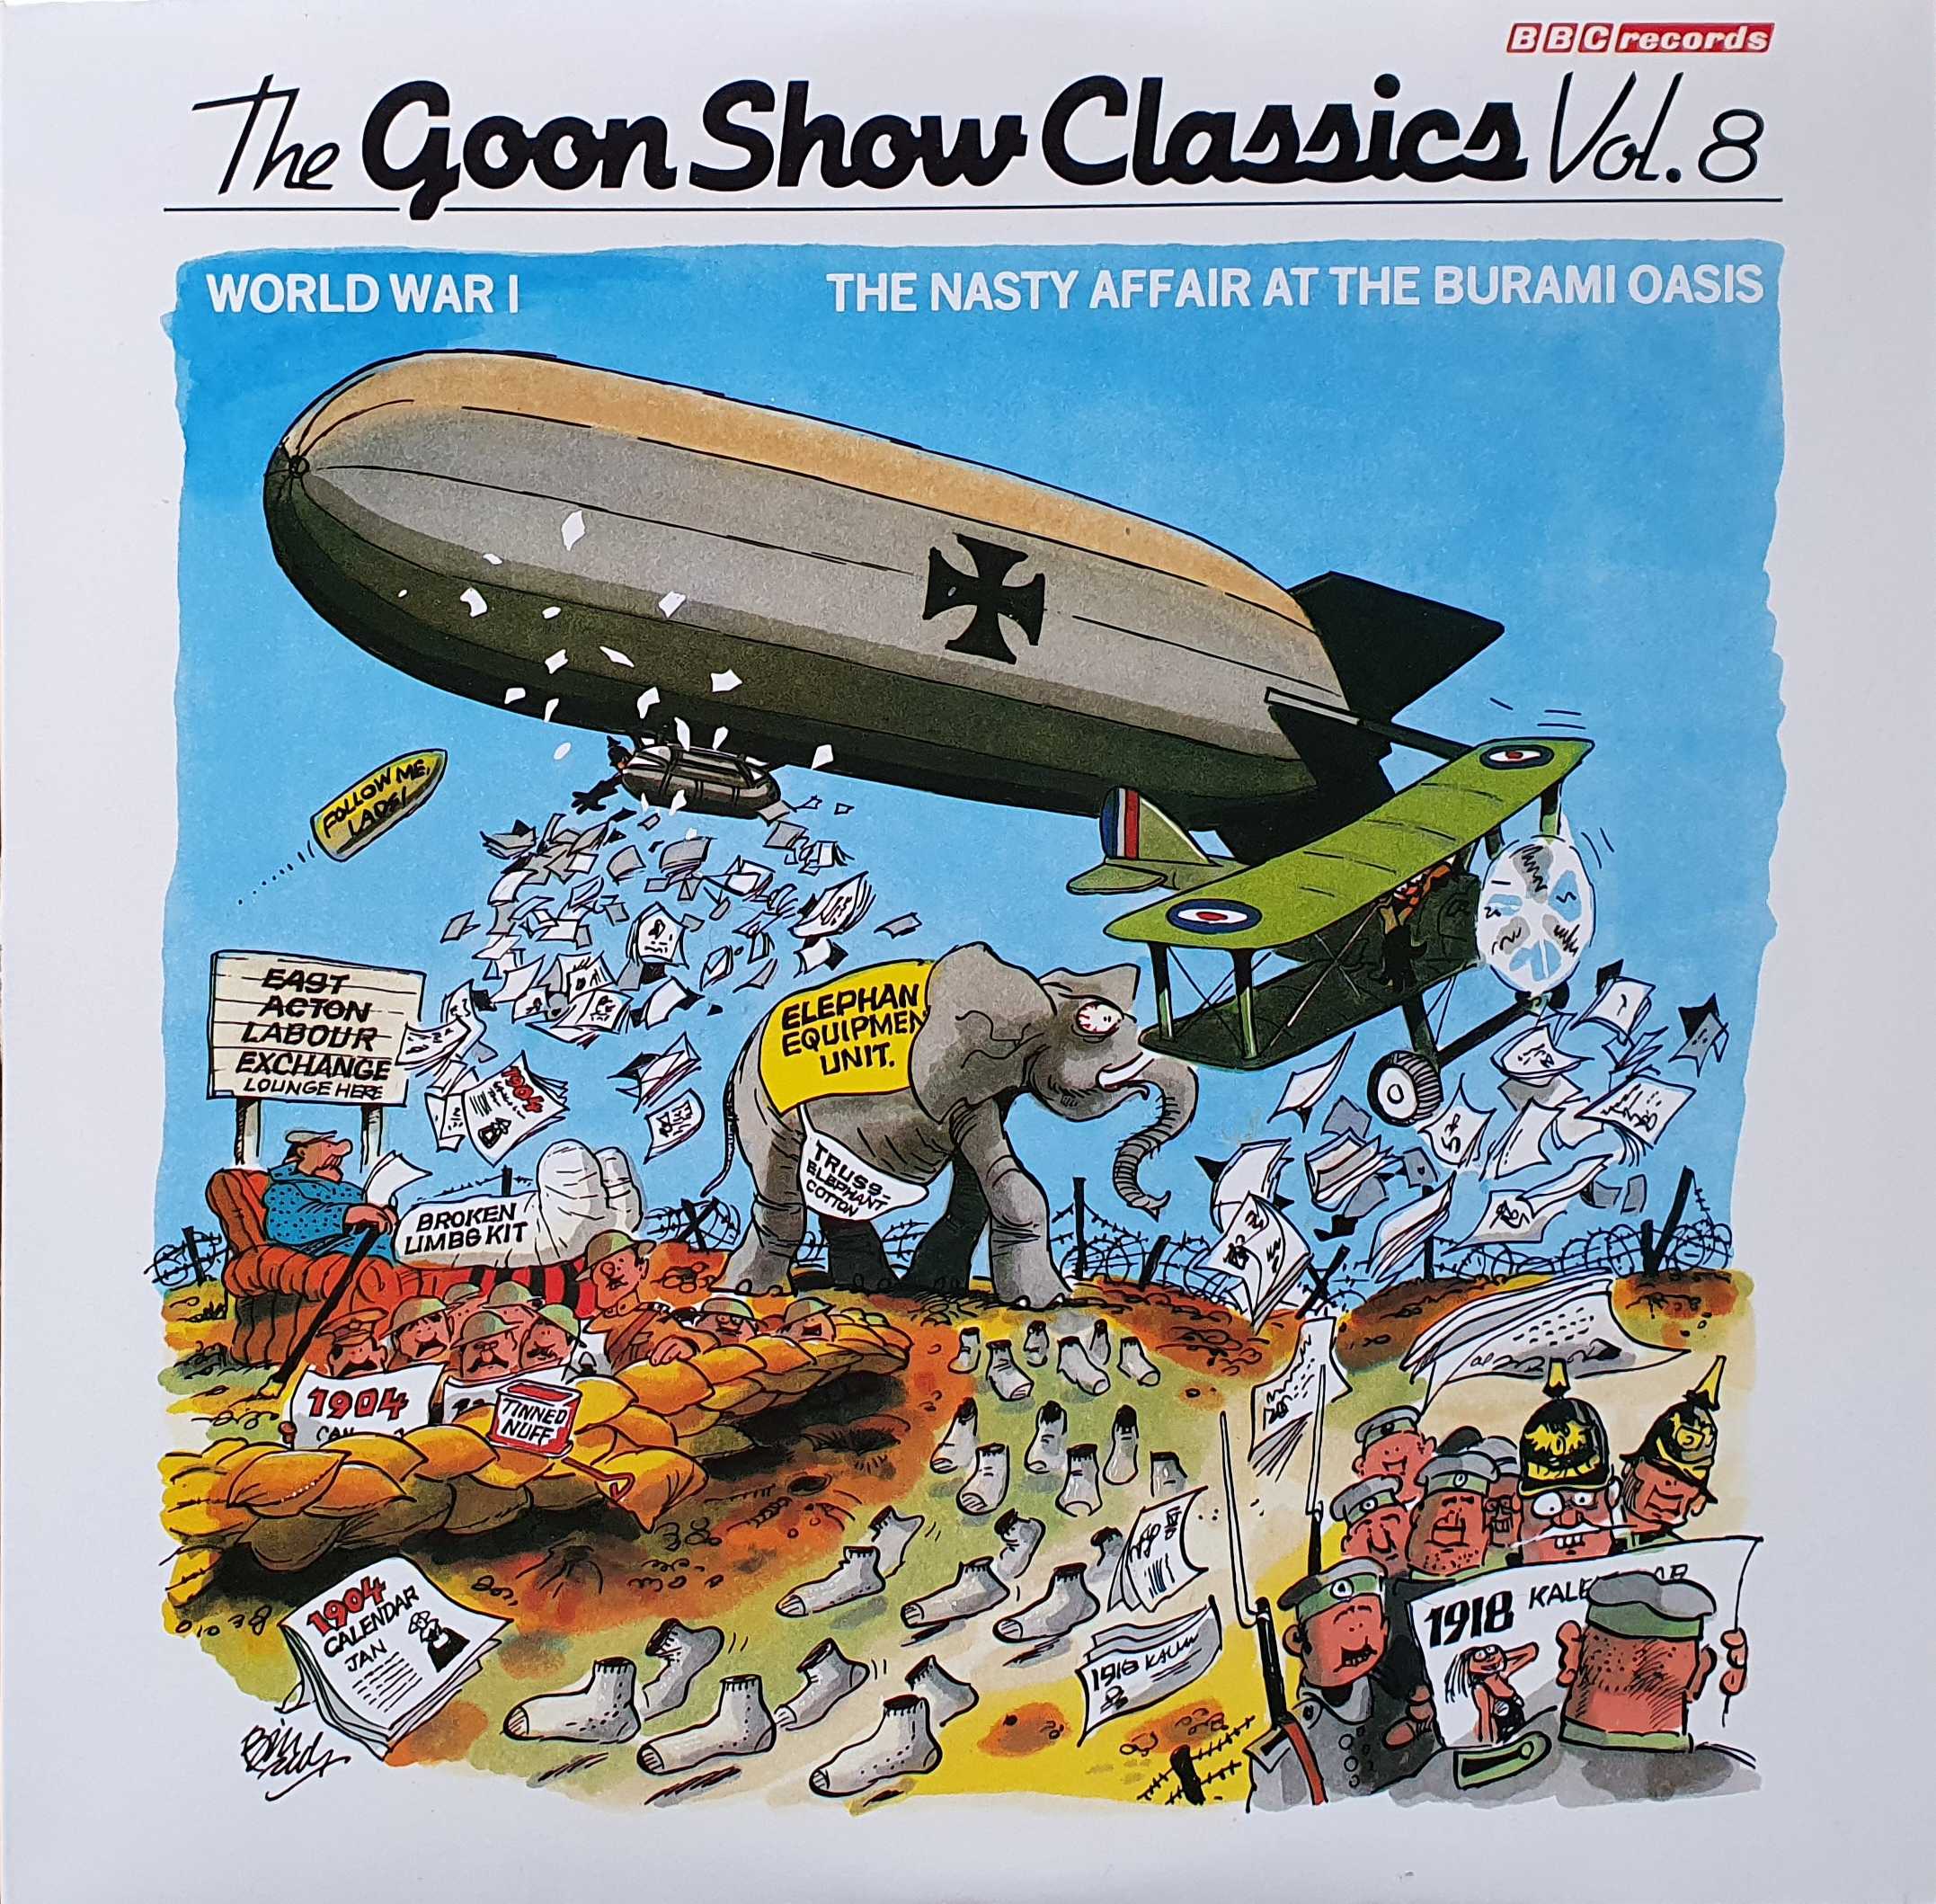 Picture of 2964 067 Goon Show classics Vol. 8 (Australian import) by artist The Goon Show from the BBC albums - Records and Tapes library